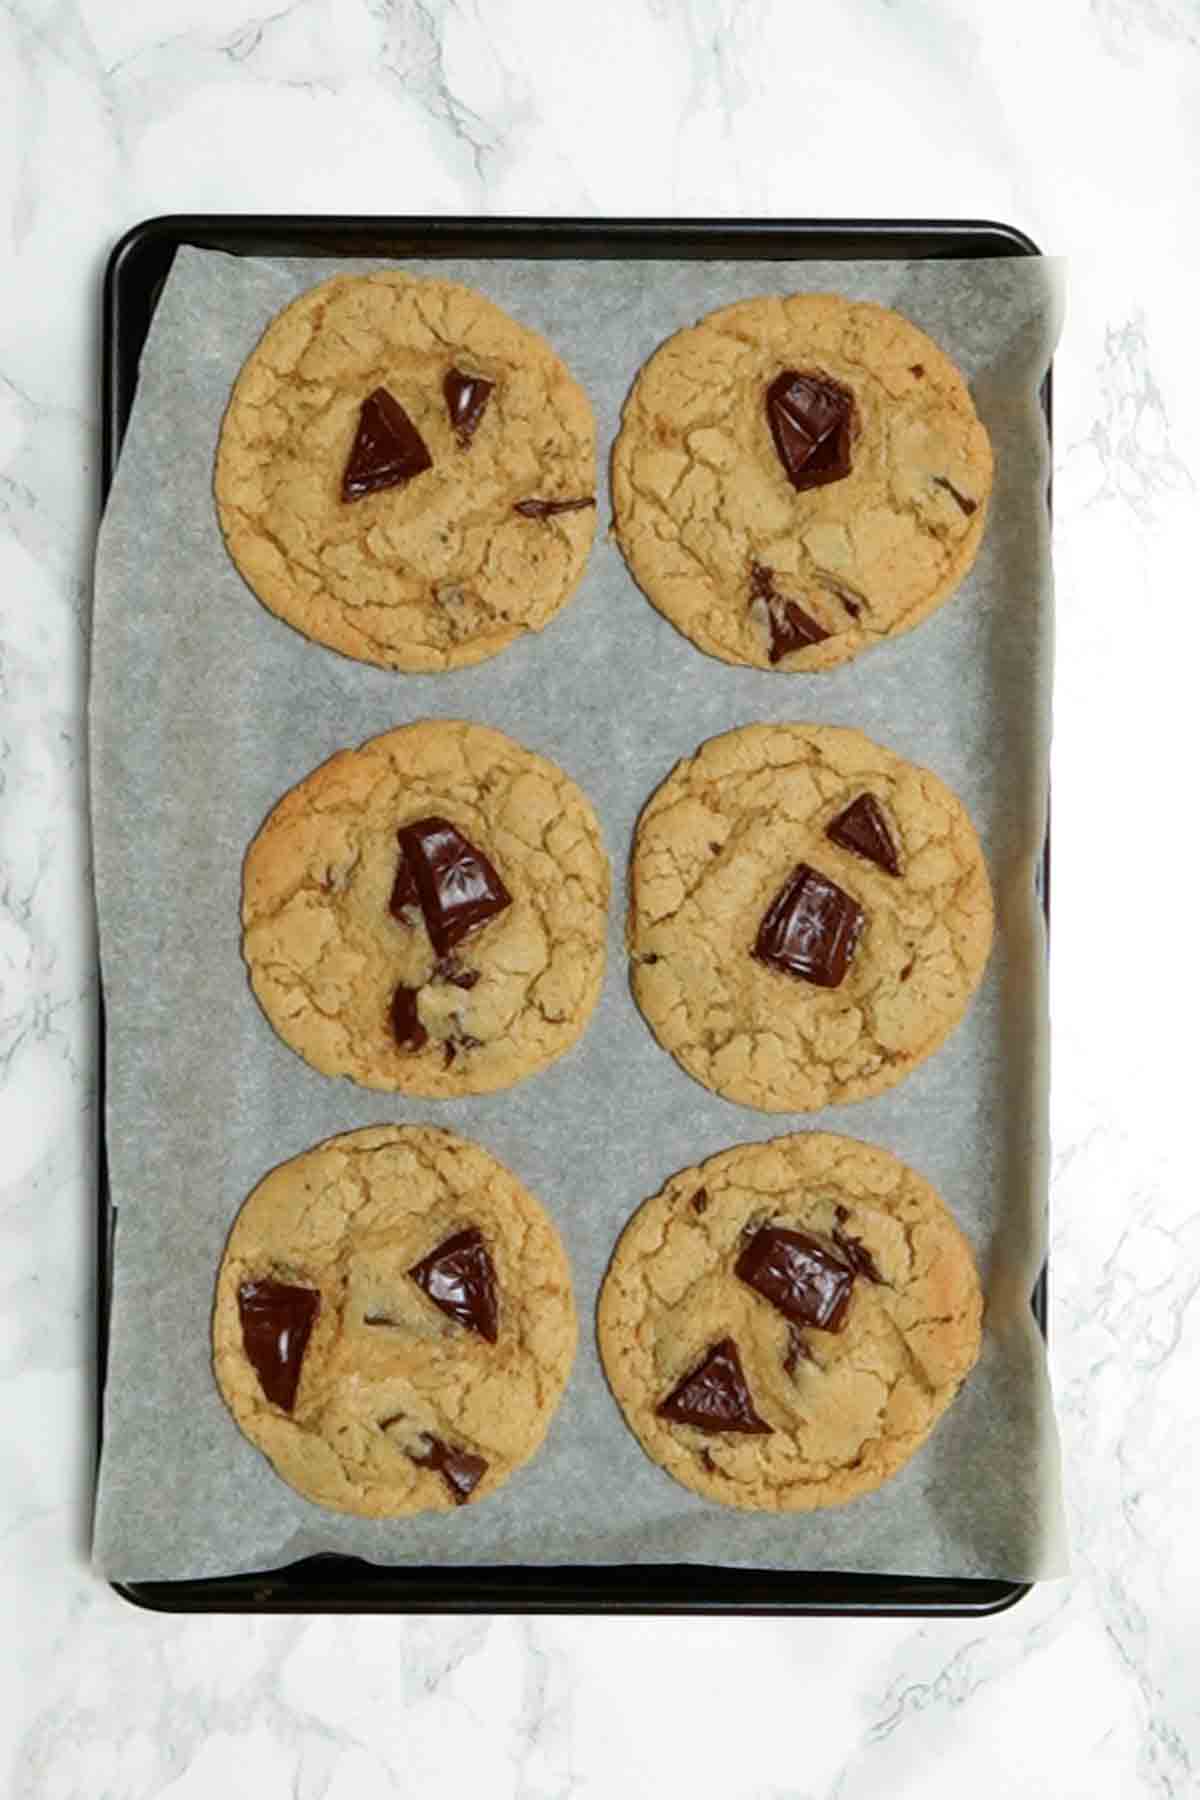 6 Baked Cookies On A Lined Baking Tray